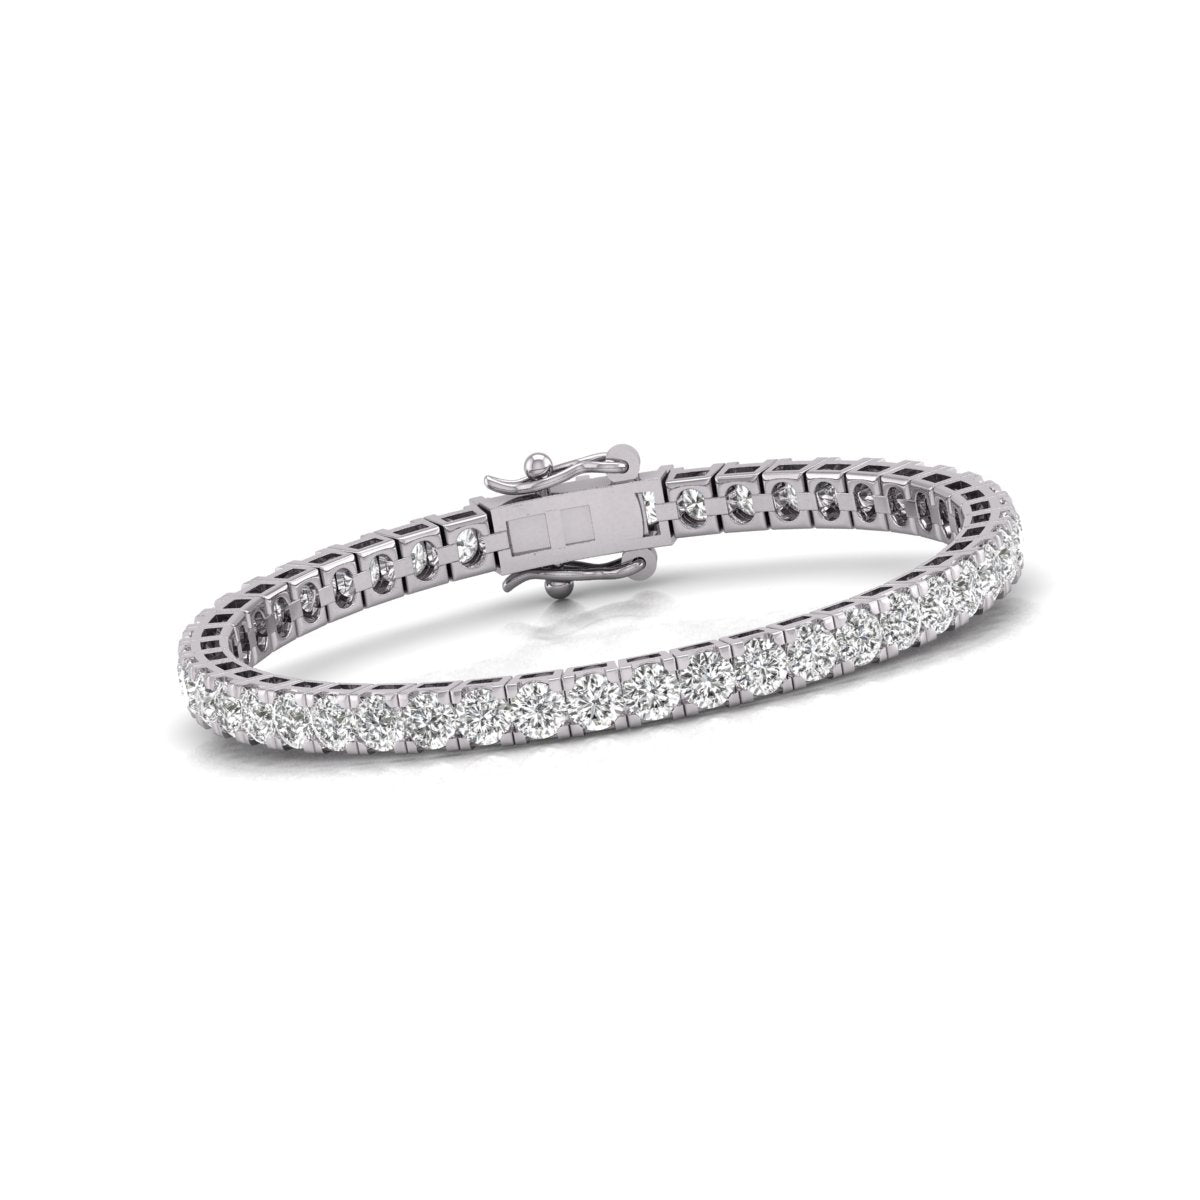 10 Carat TW Lab Grown Diamond Tennis Bracelet for Women - Available in 14K Yellow and White Gold